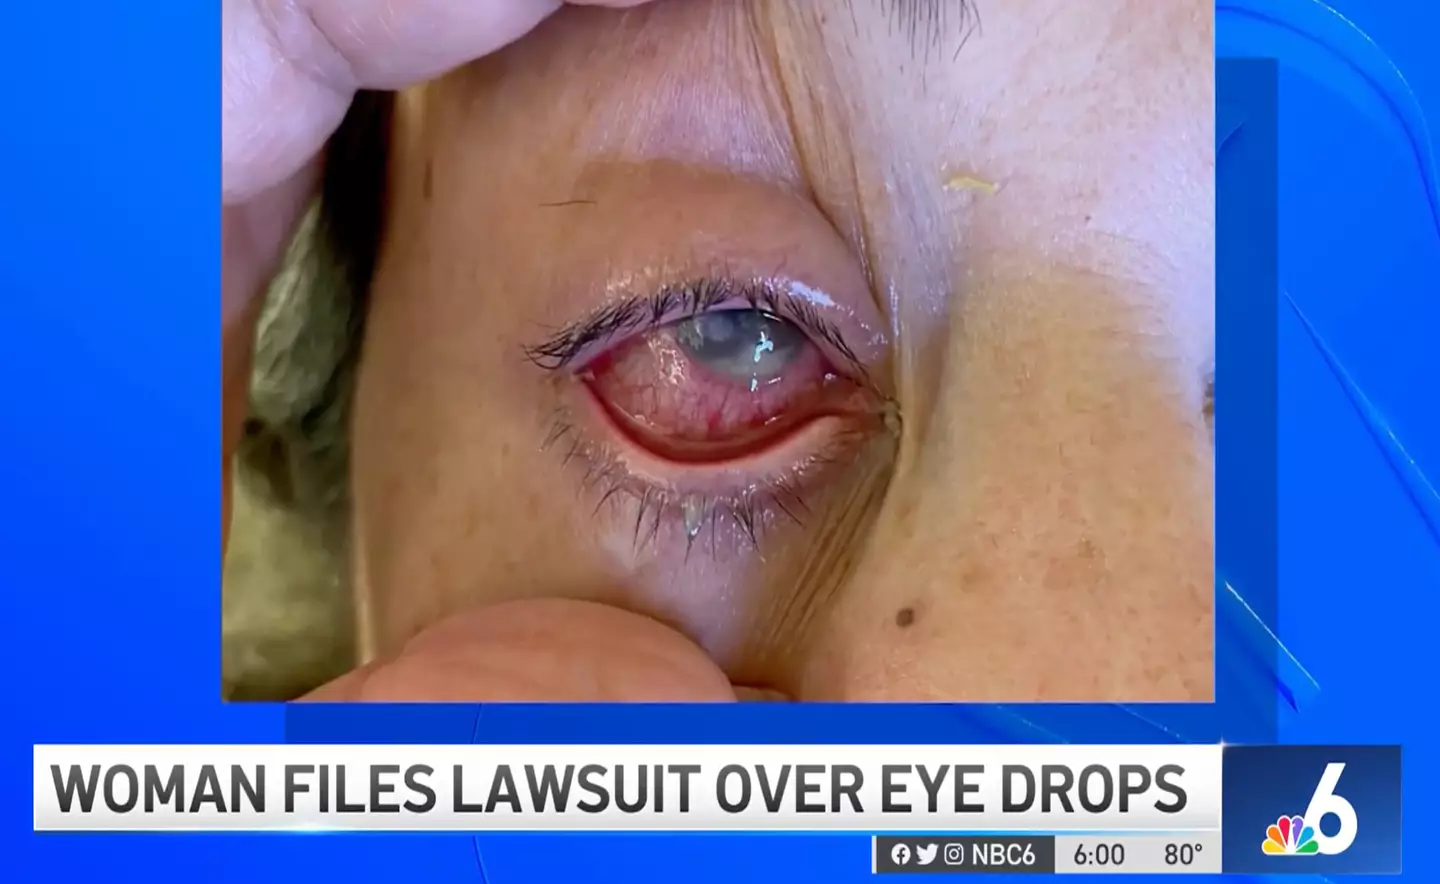 Her eye worsened to the point where it had to be removed, leaving her legally blind.